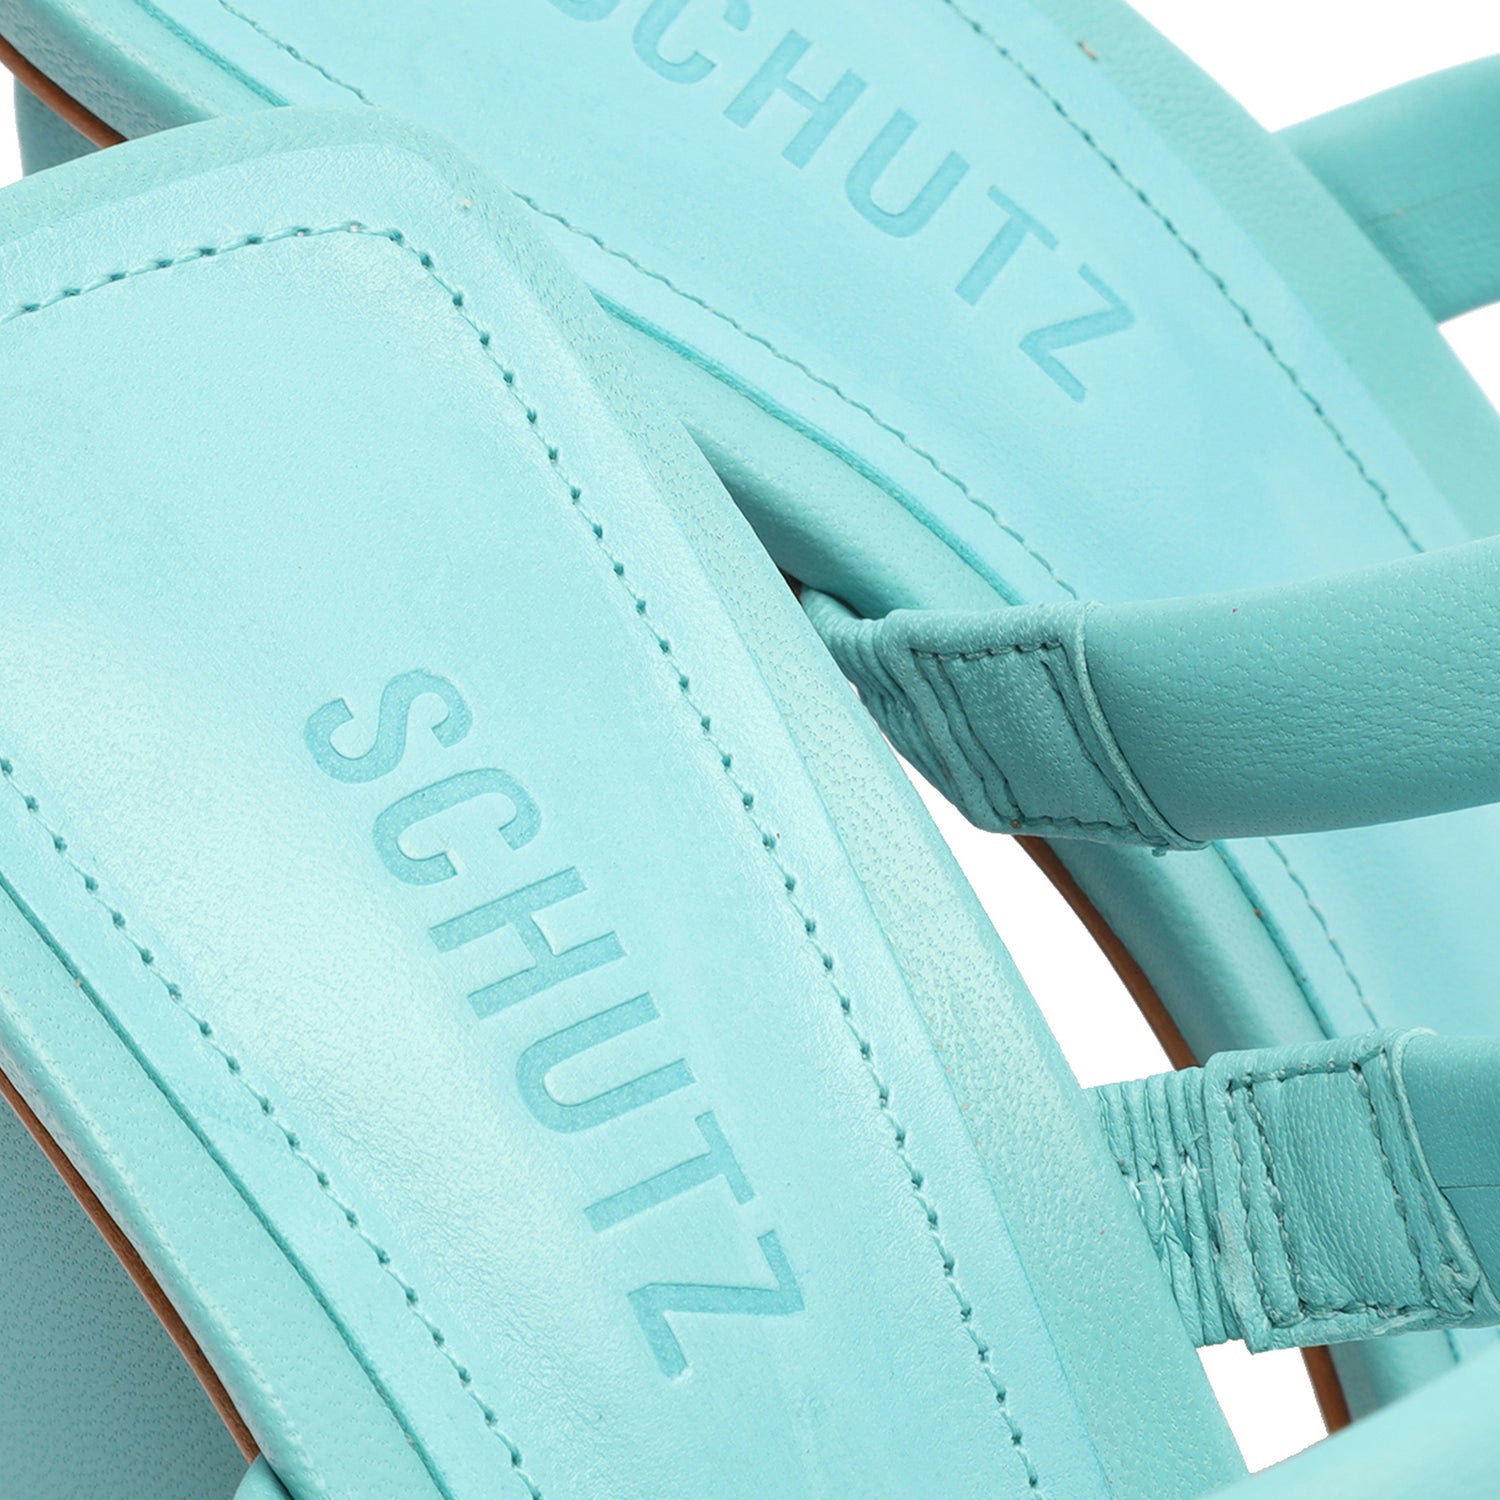 Ully Nappa Leather Sandal Sandals Sale    - Schutz Shoes